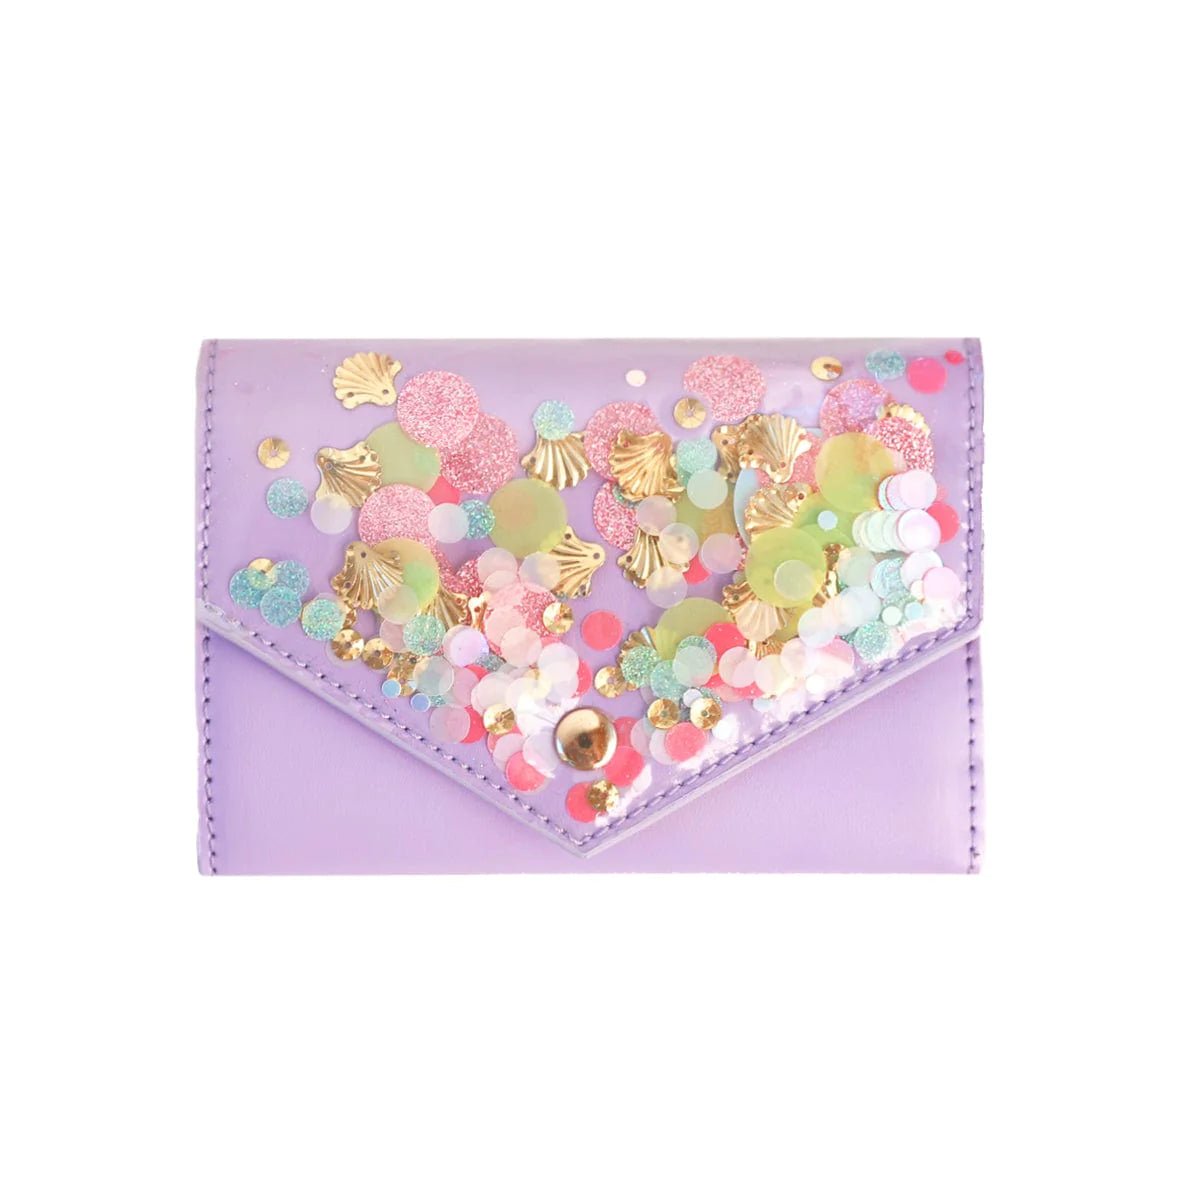 Shop Packed Party Shell It Out Confetti Wallet - Premium Purse from Packed Party Online now at Spoiled Brat 